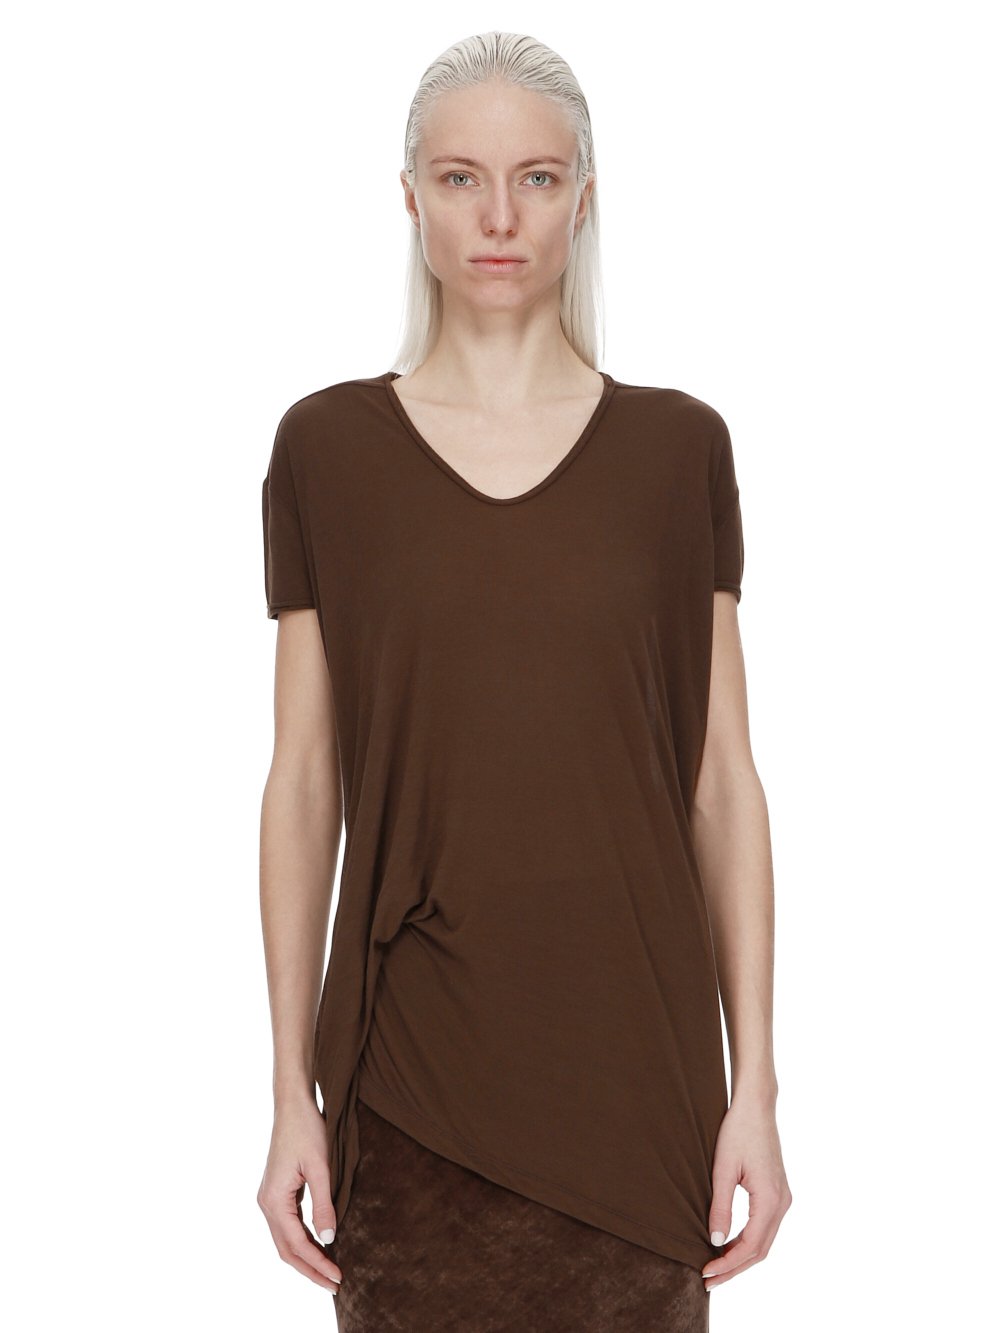 RICK OWENS FW23 LUXOR HIKED T IN BROWN VISCOSE SILK JERSEY